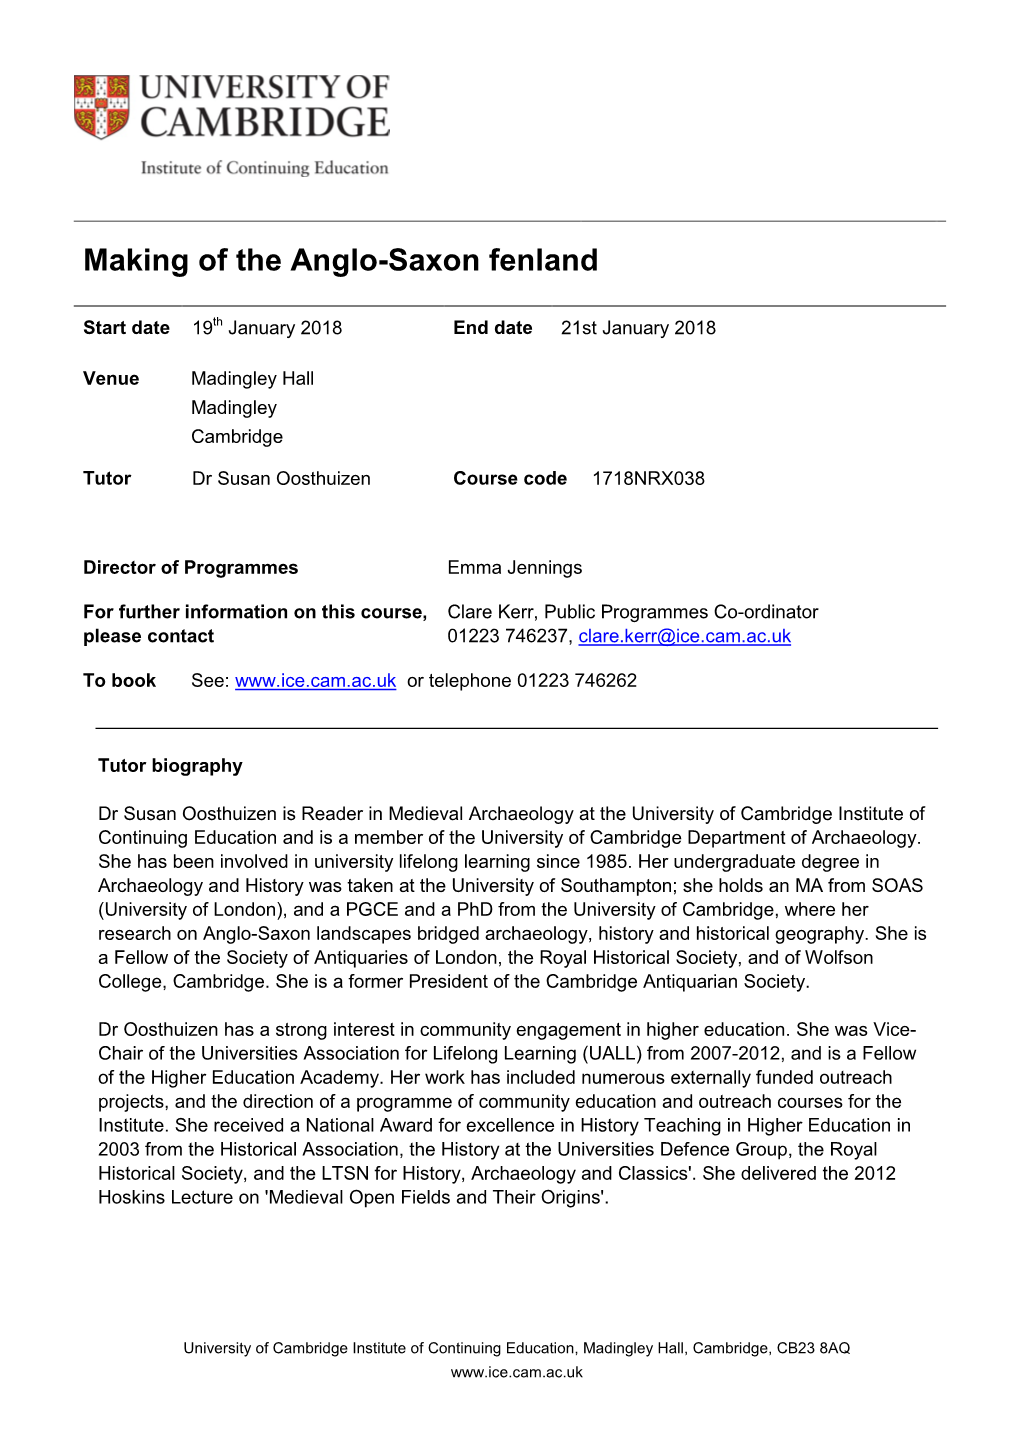 Making of the Anglo-Saxon Fenland